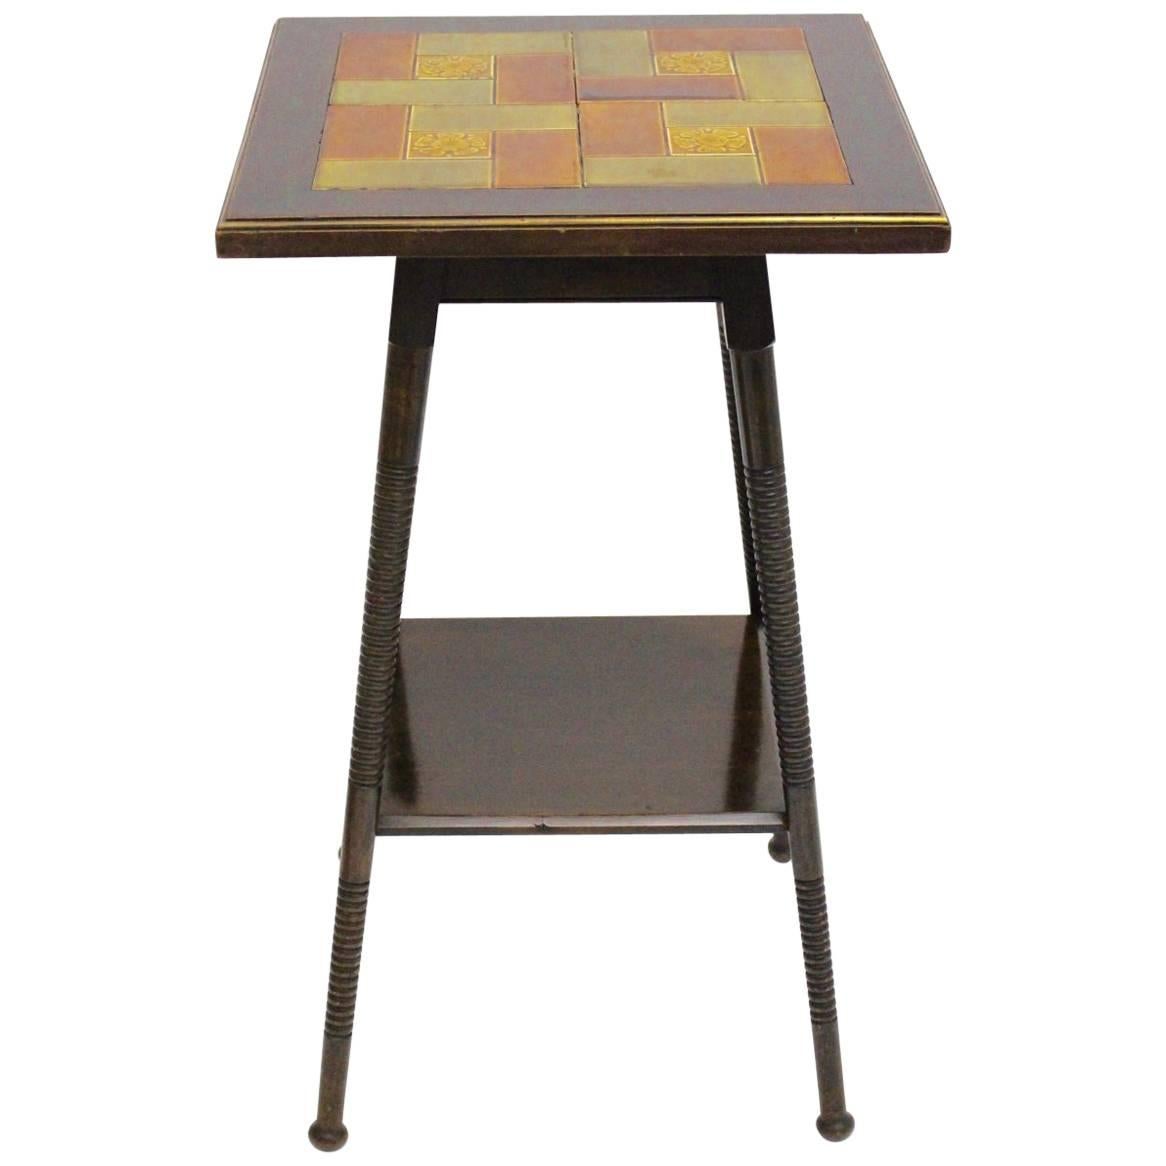 Art Deco Era Side Table, circa 1930 with Ceramic Tiles Used by Adolf Loos